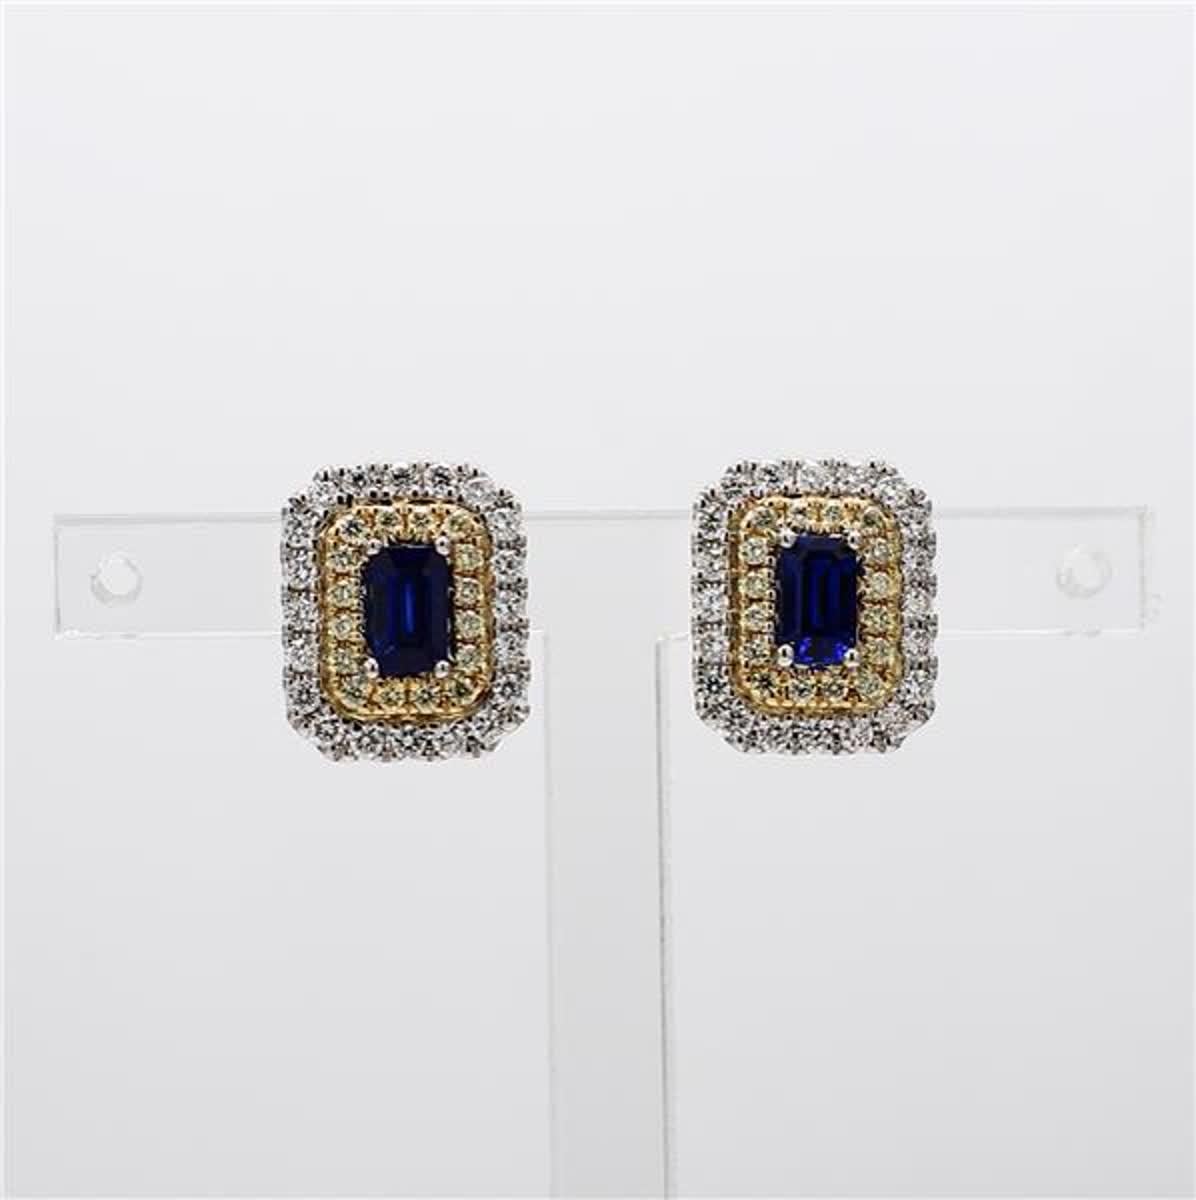 RareGemWorld's classic sapphire earrings. Mounted in a beautiful 18K Yellow and White Gold setting with natural emerald cut blue sapphires. The sapphires are surrounded by natural round yellow diamond melee and natural round white diamond melee.